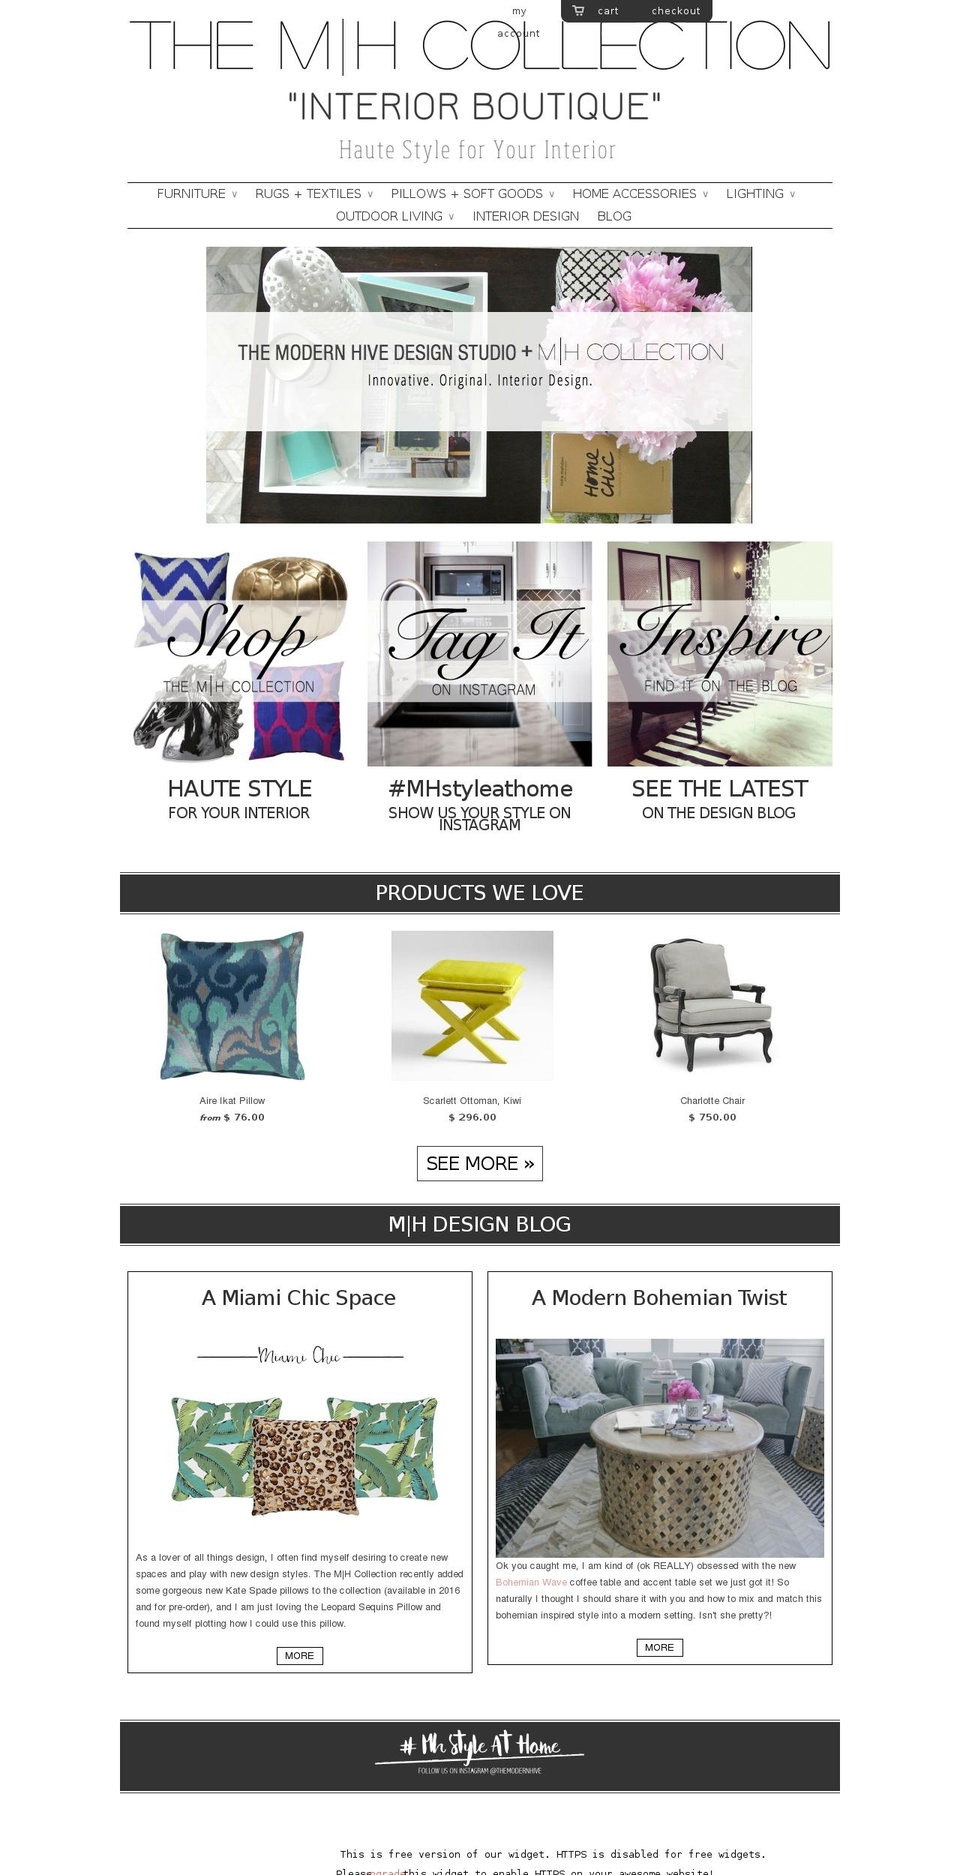 Mode Shopify theme site example themhcollection.com